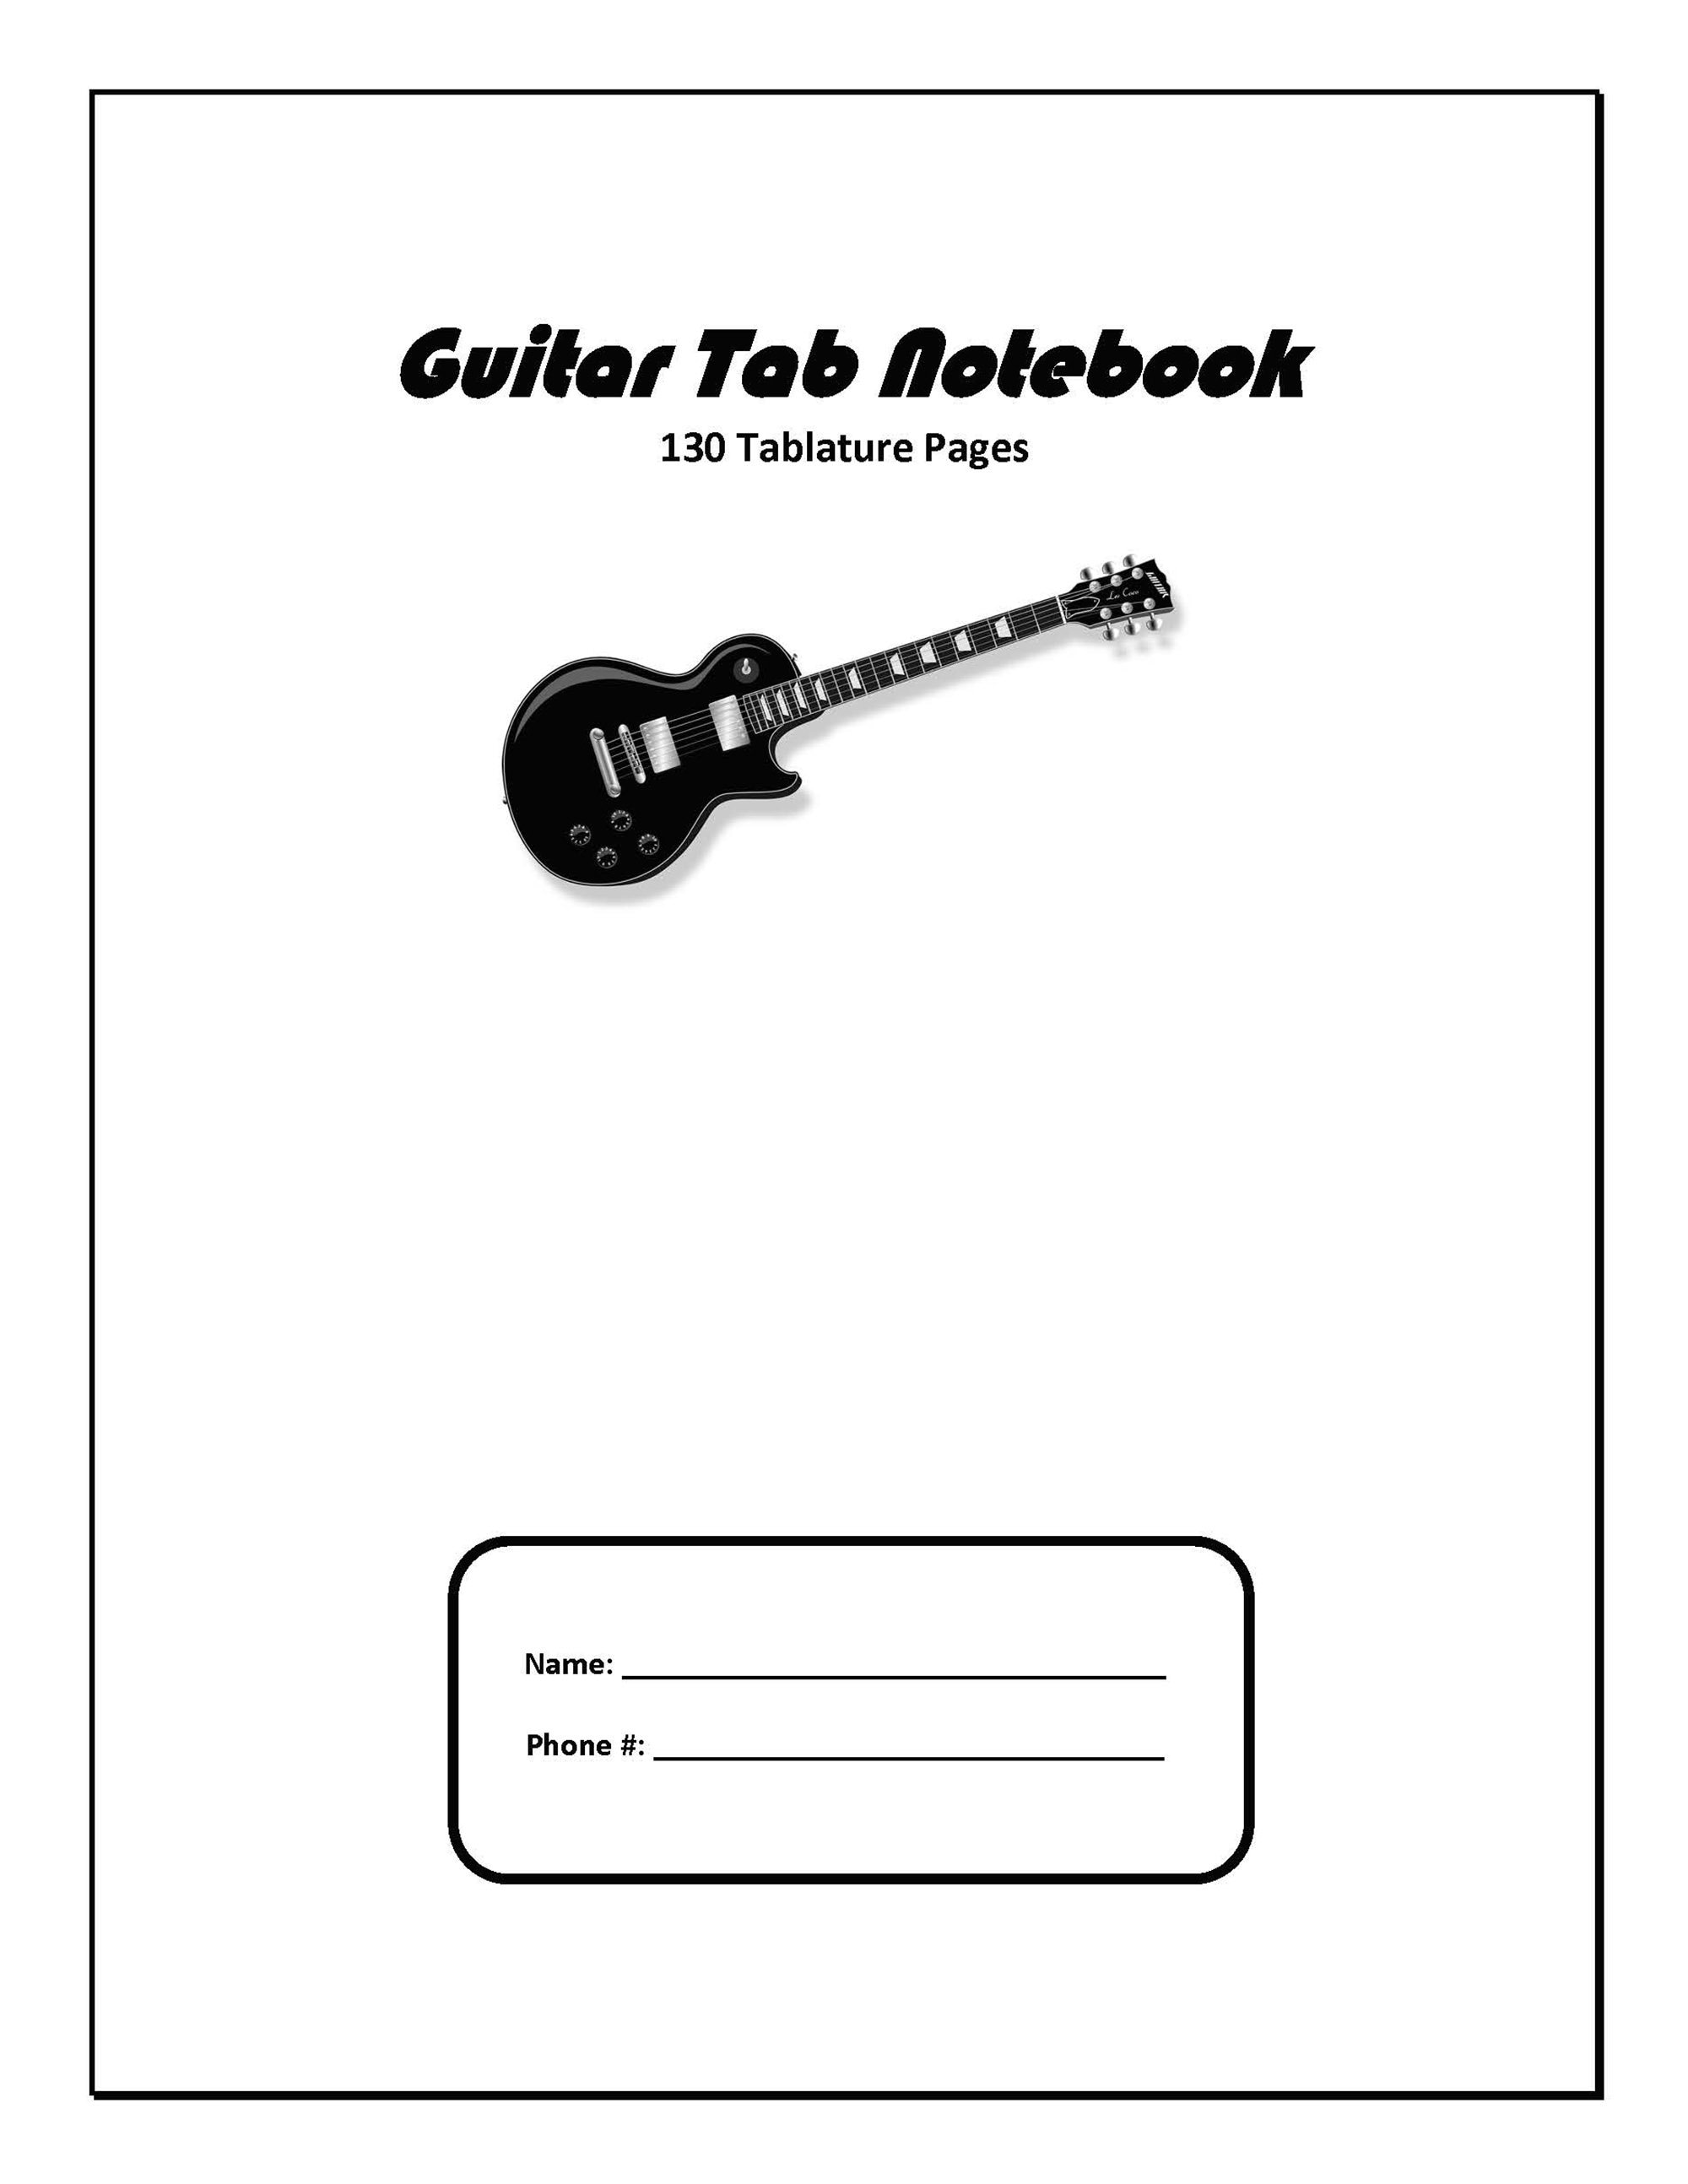  Guitar Tab Notebook - 6 string guitar 100 blank pages: - 5  treble clef & guitar tab staffs per page (Guitar Resources Series):  9780995673229: Brockie, Mr Ged: Books